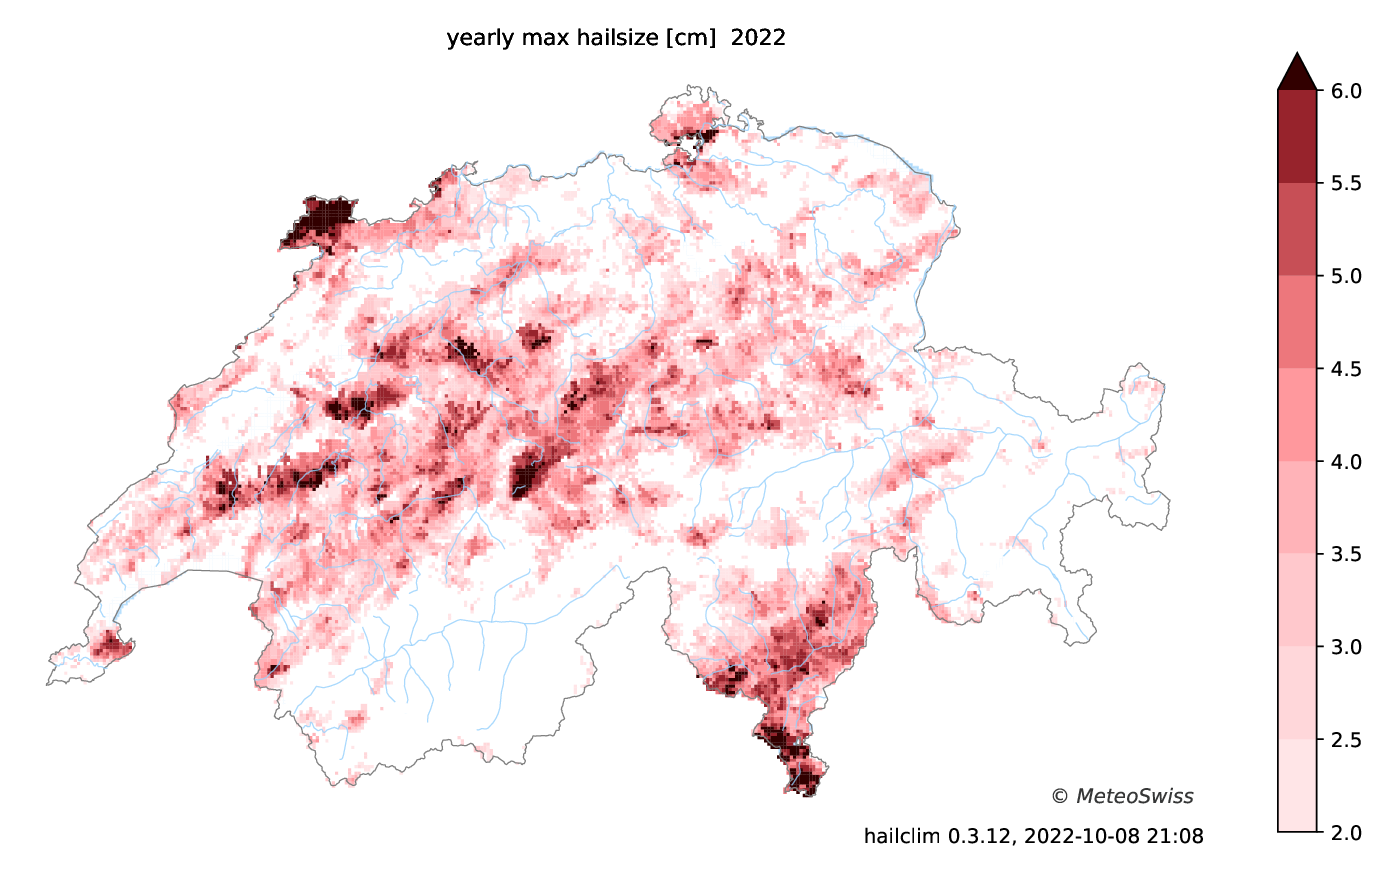 climate-hail-maps-Y_hailsize_abs_2022-001